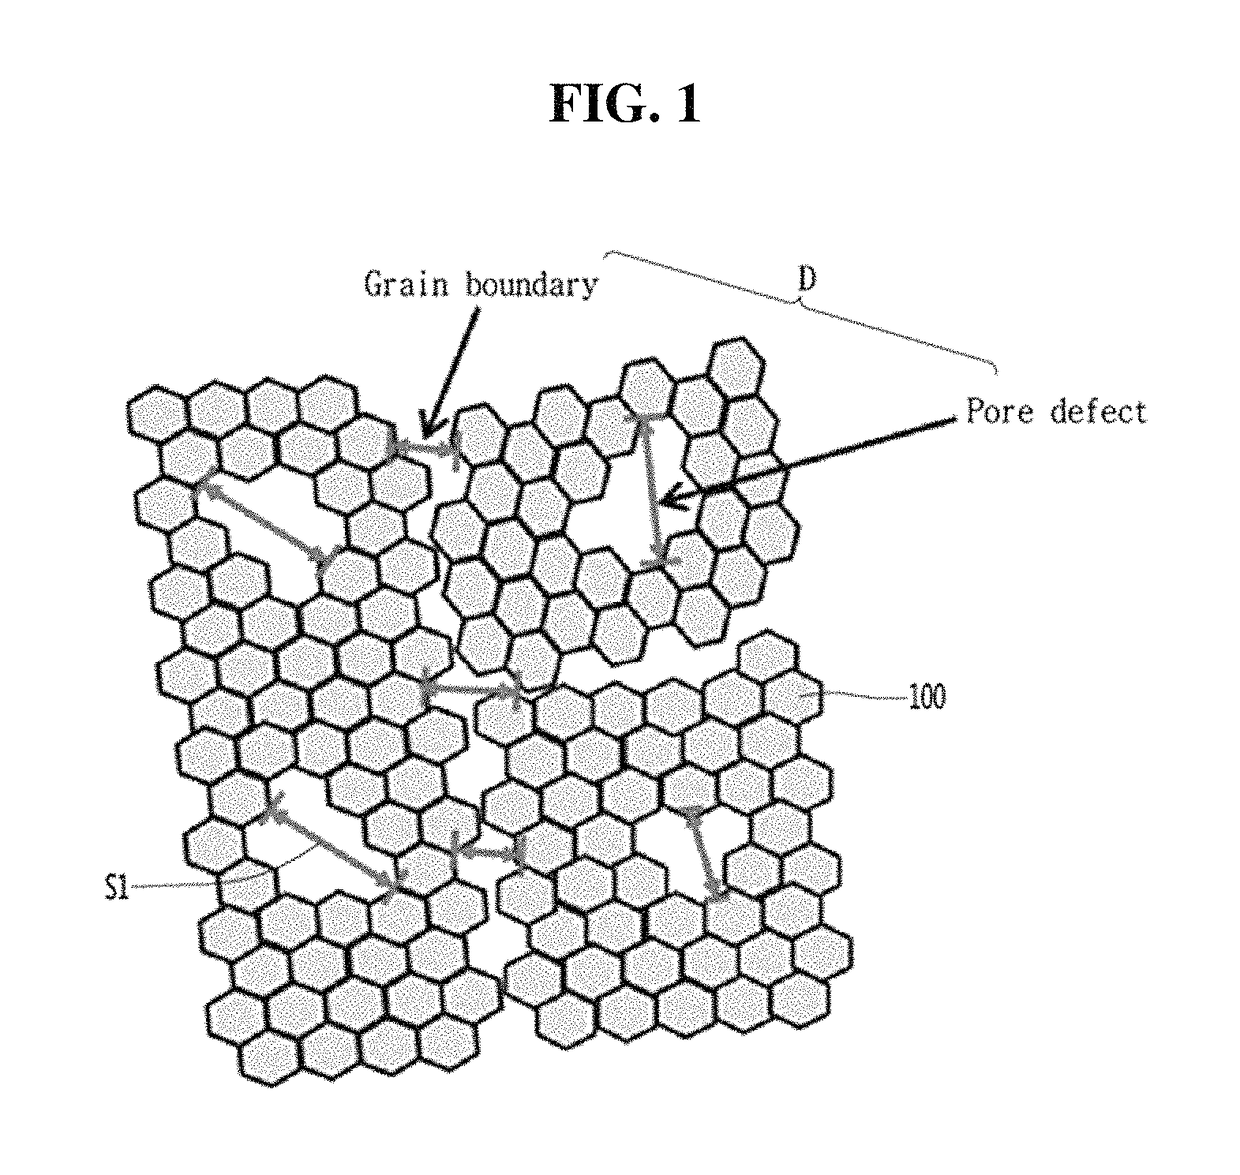 Membrane based on graphene and method of manufacturing same